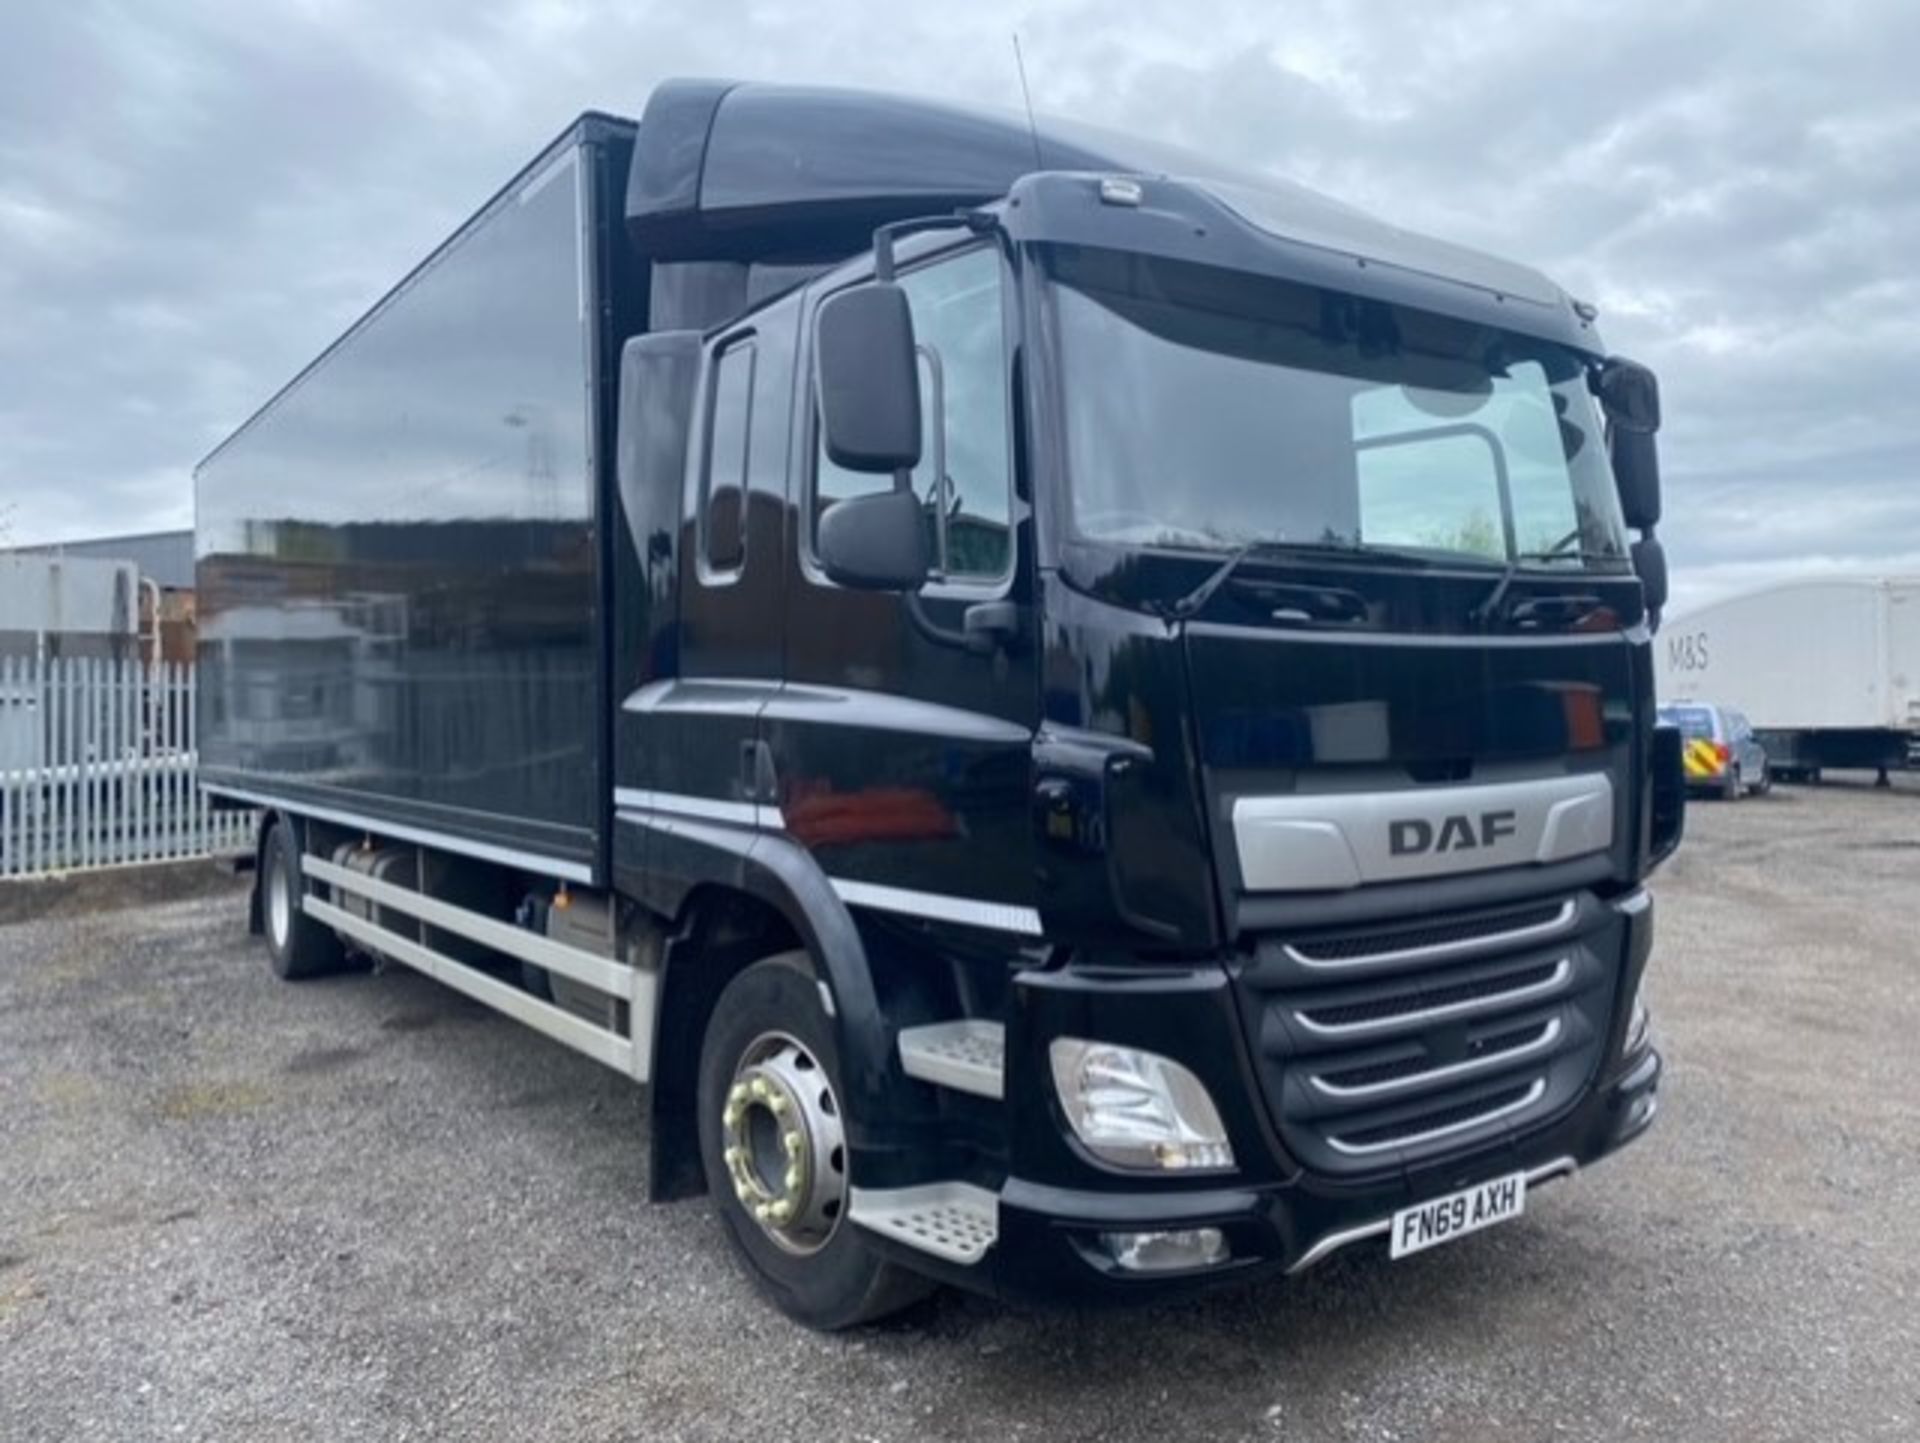 2019, DAF CF 260 FA - FN69 AXH (18 Ton Rigid Truck with Tail Lift) - Image 21 of 22